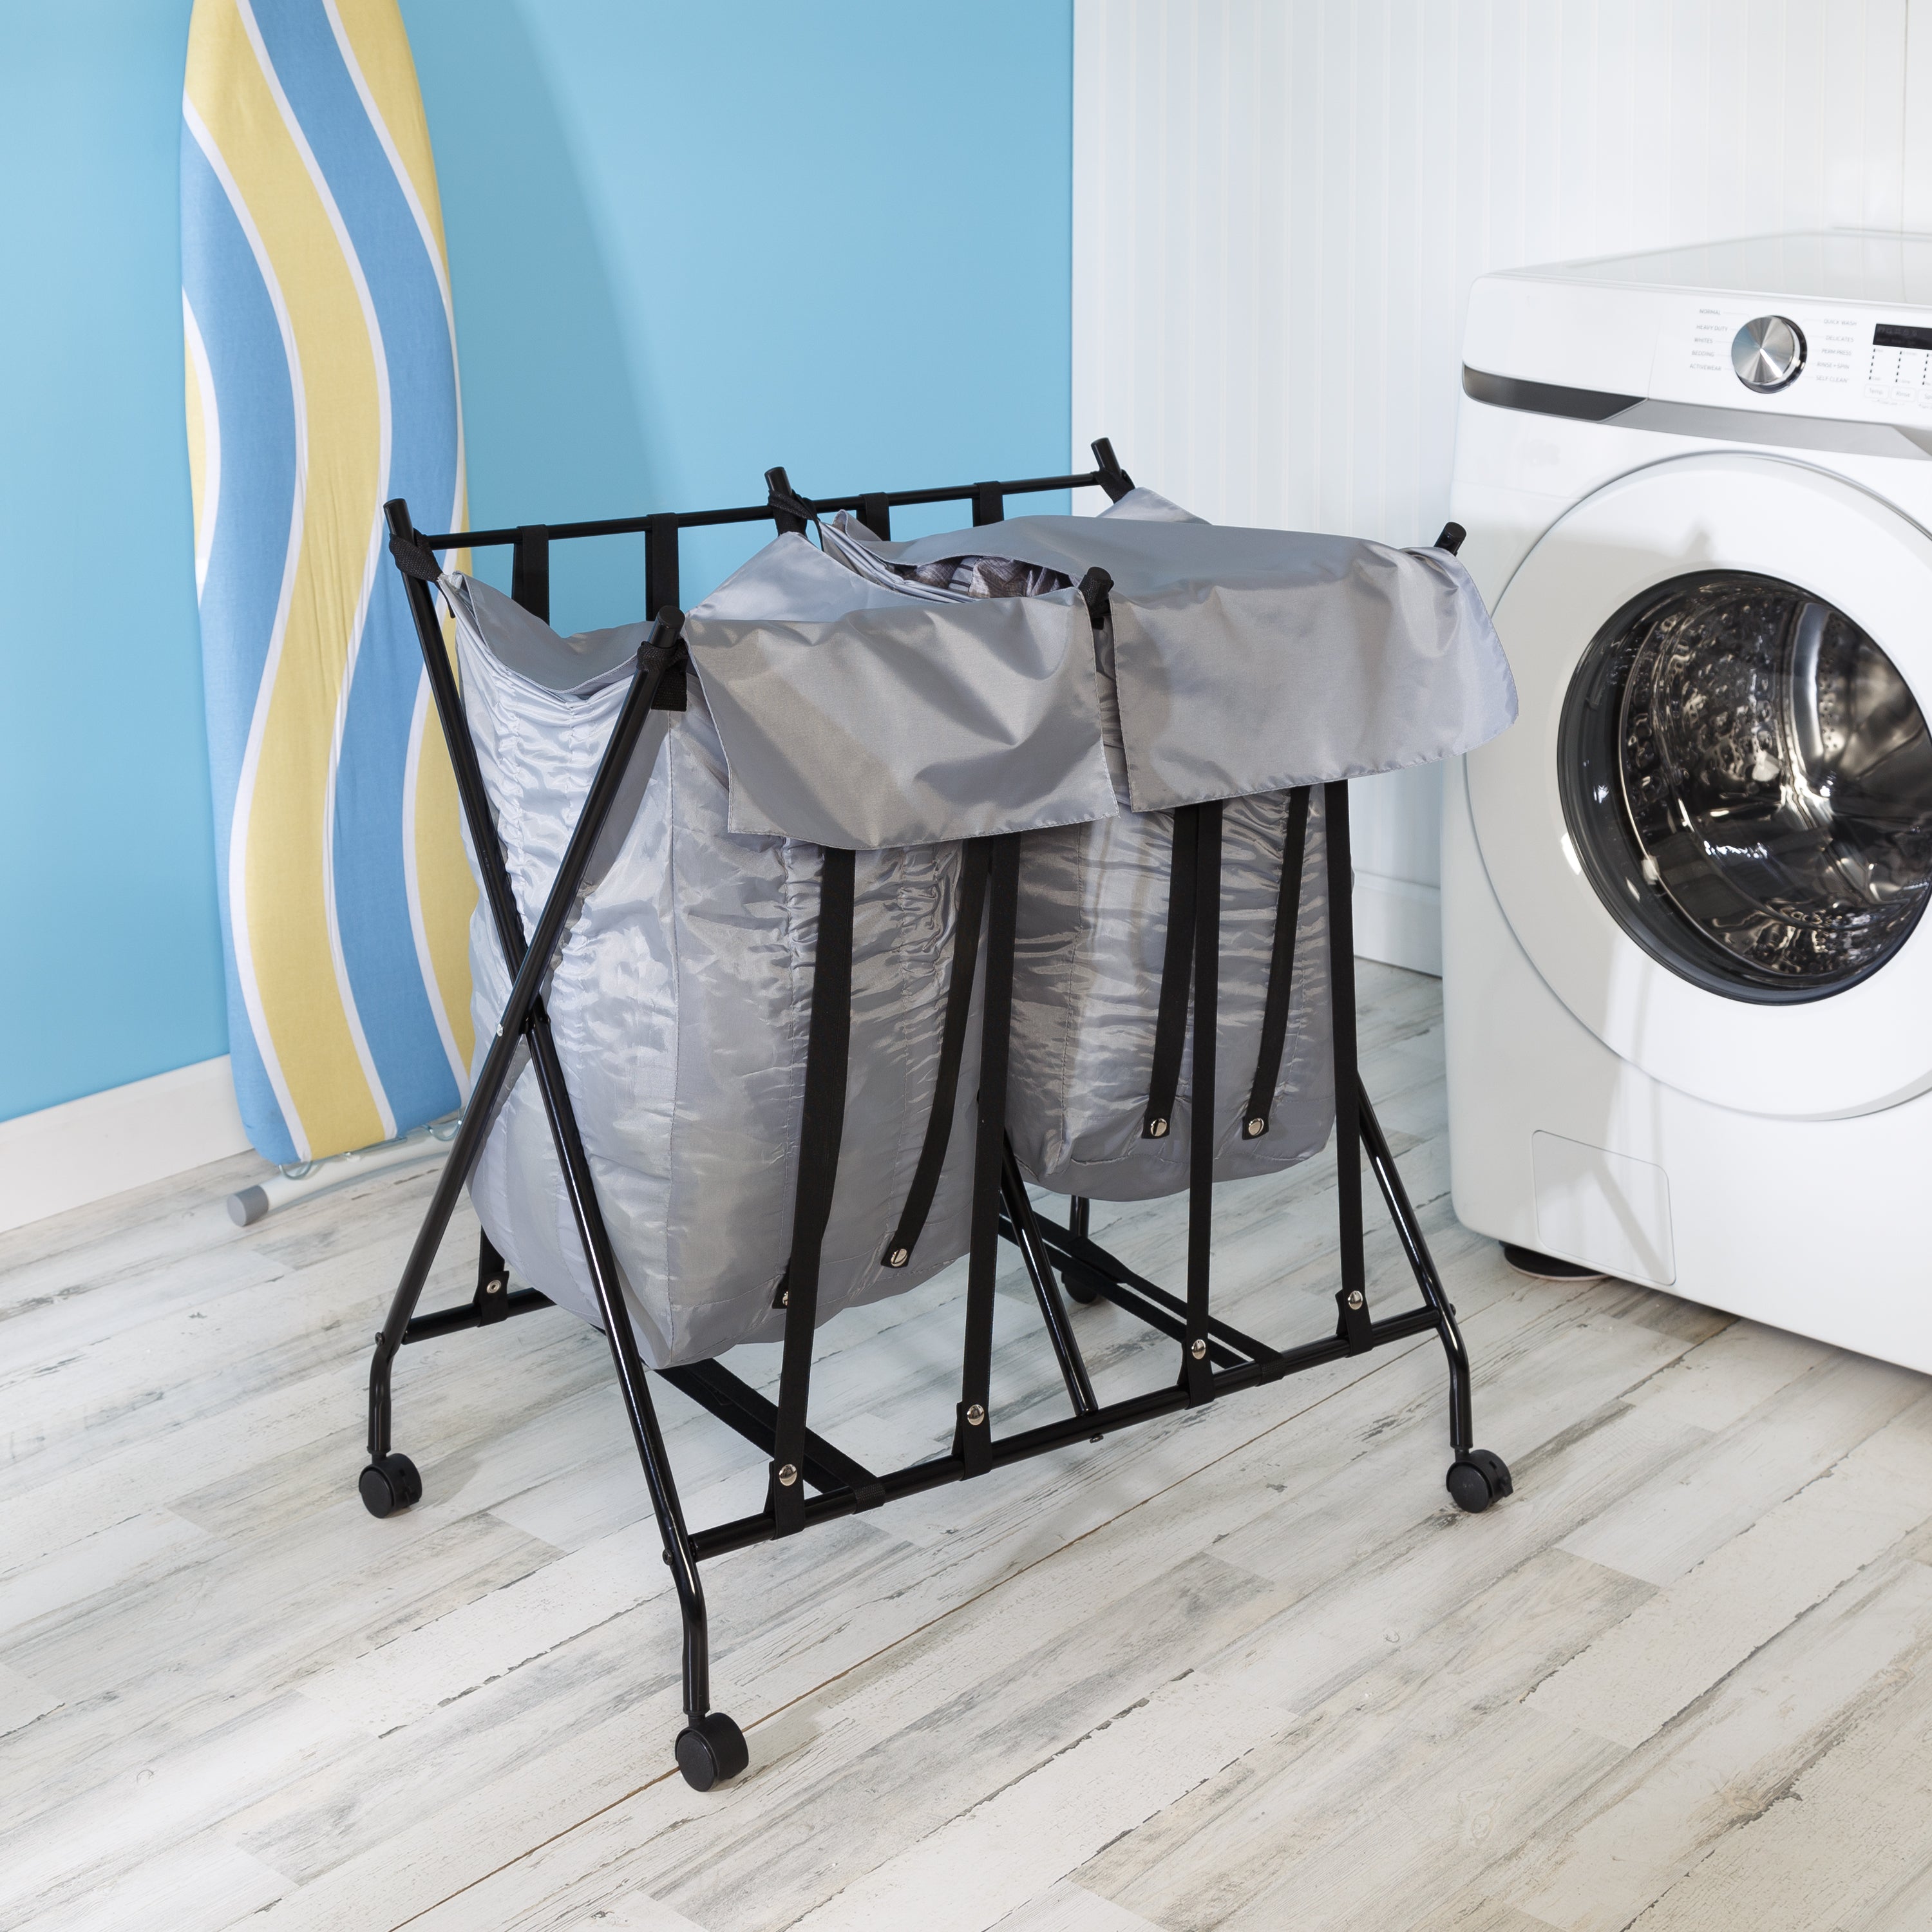 For People Who Hate Doing Laundry-The Best Fully Automatic Washing